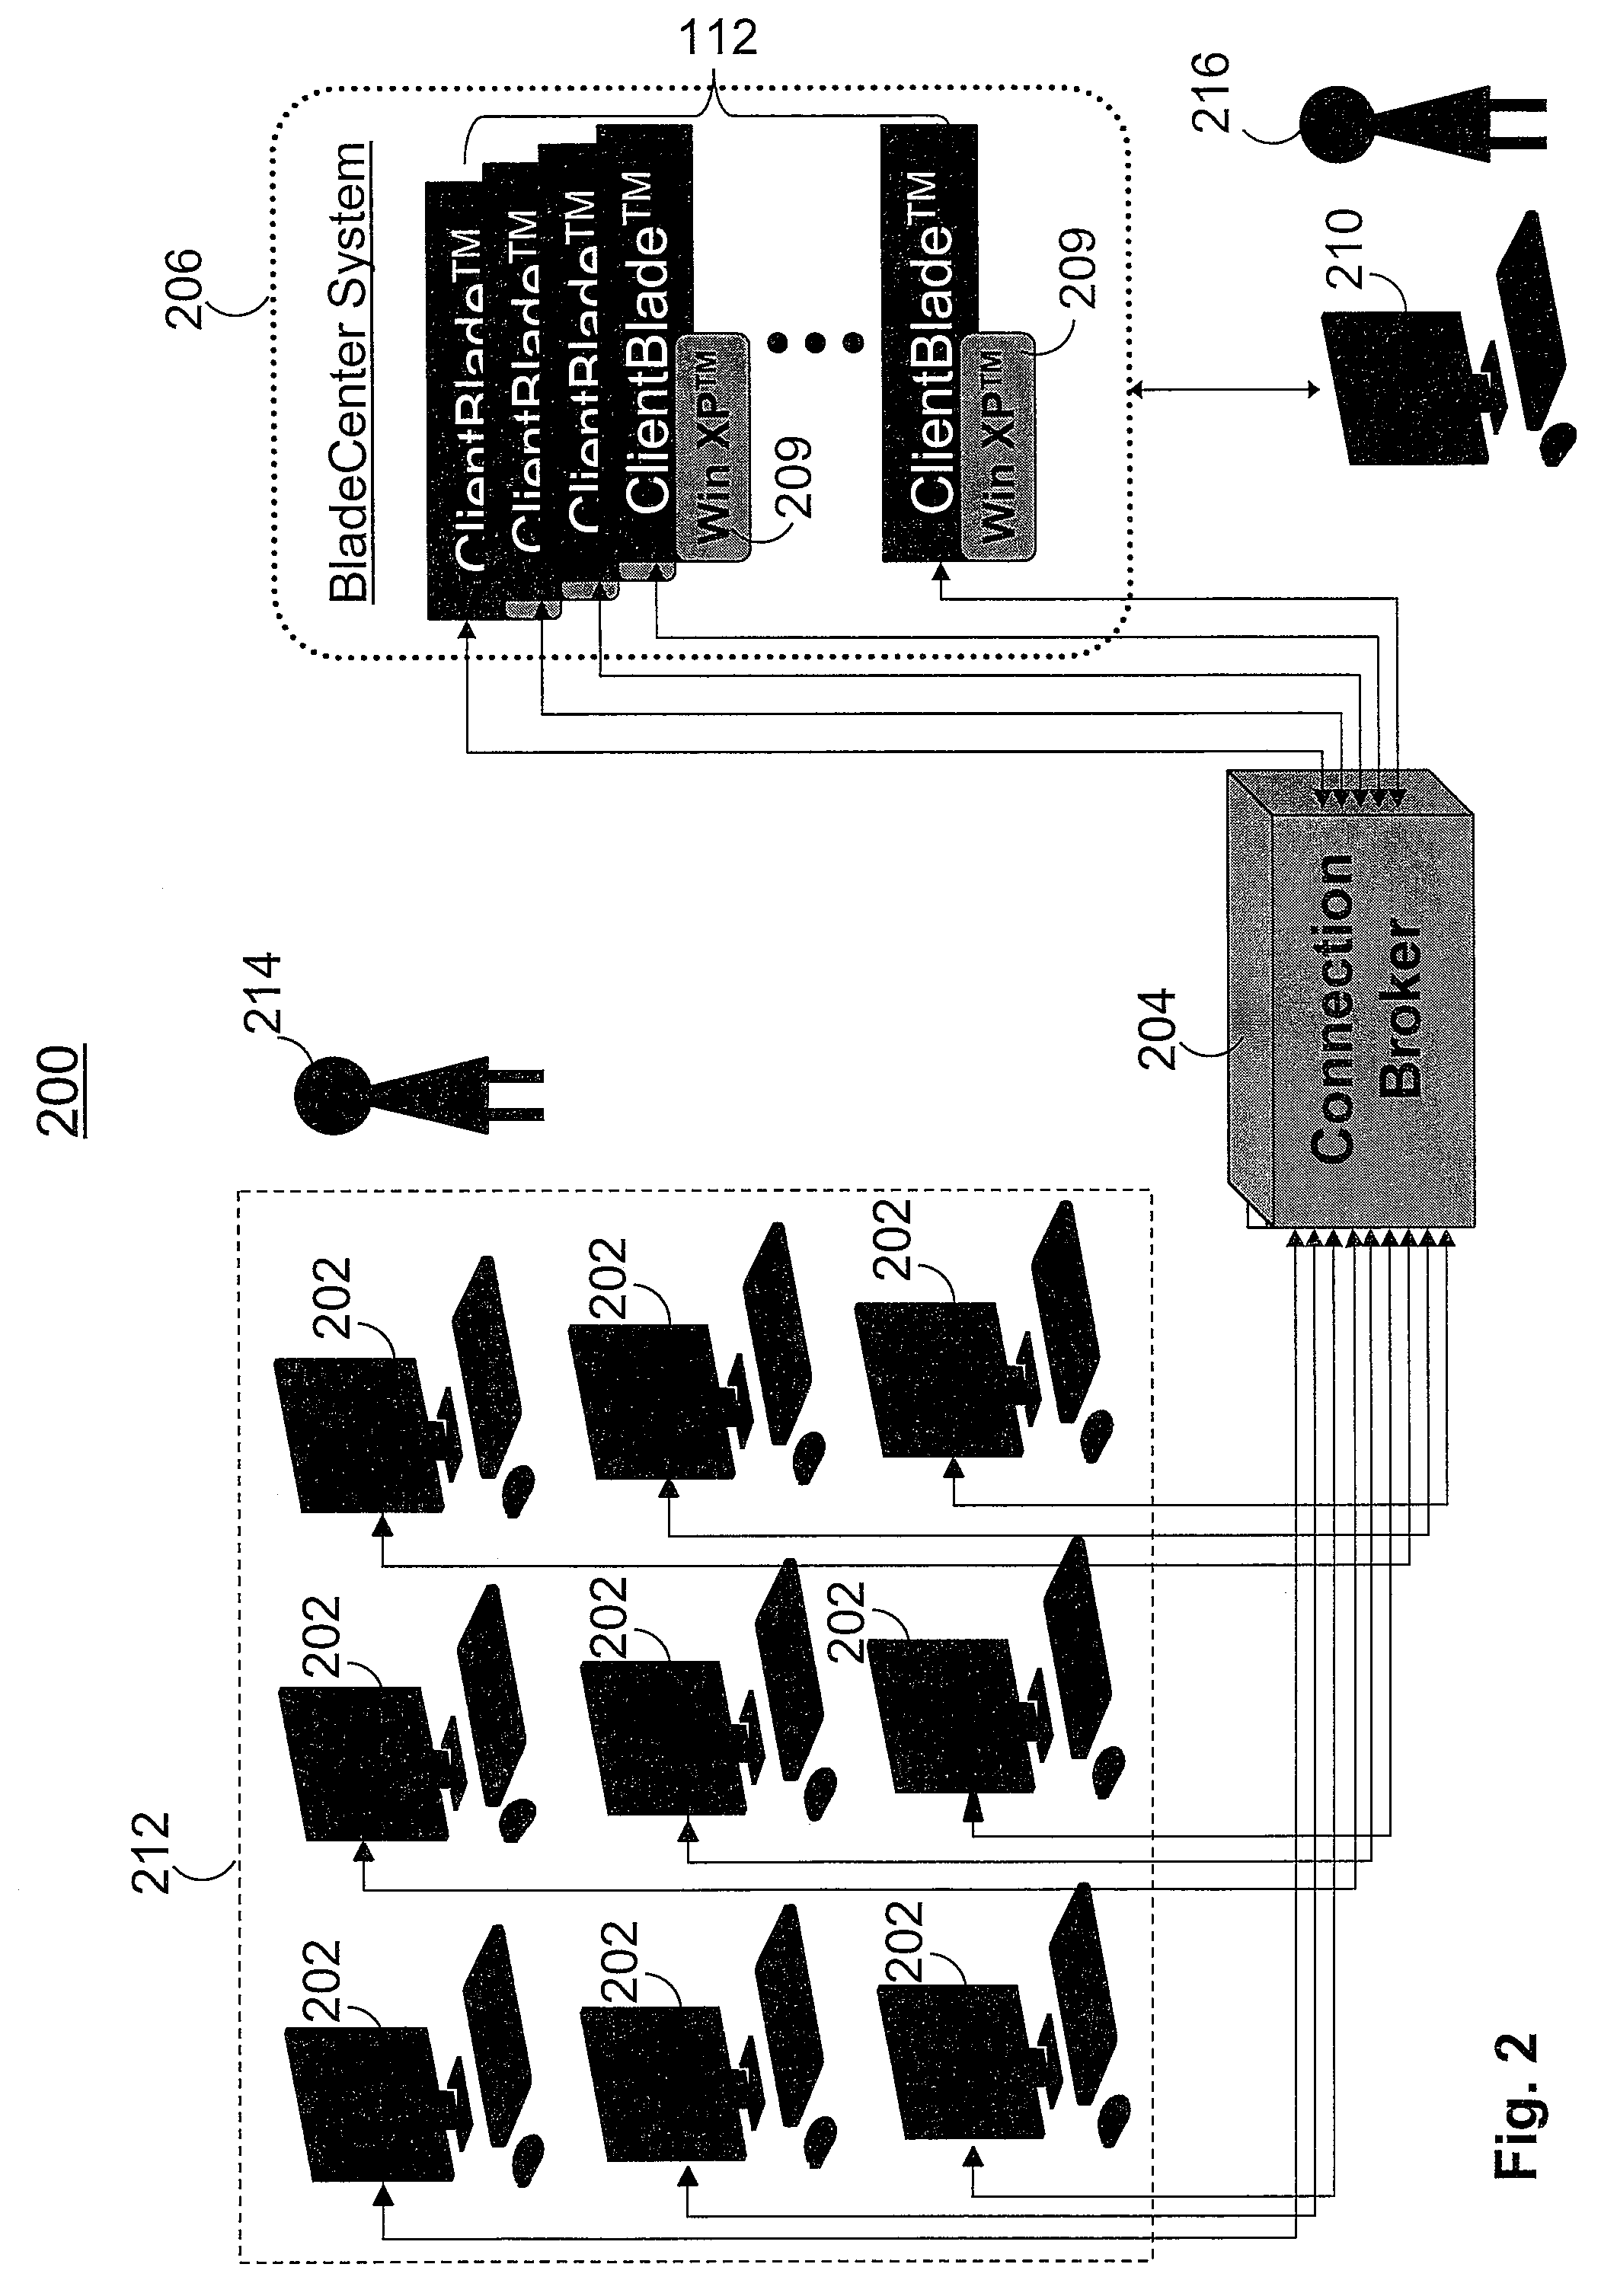 Power state control for a desktop blade in a blade server system